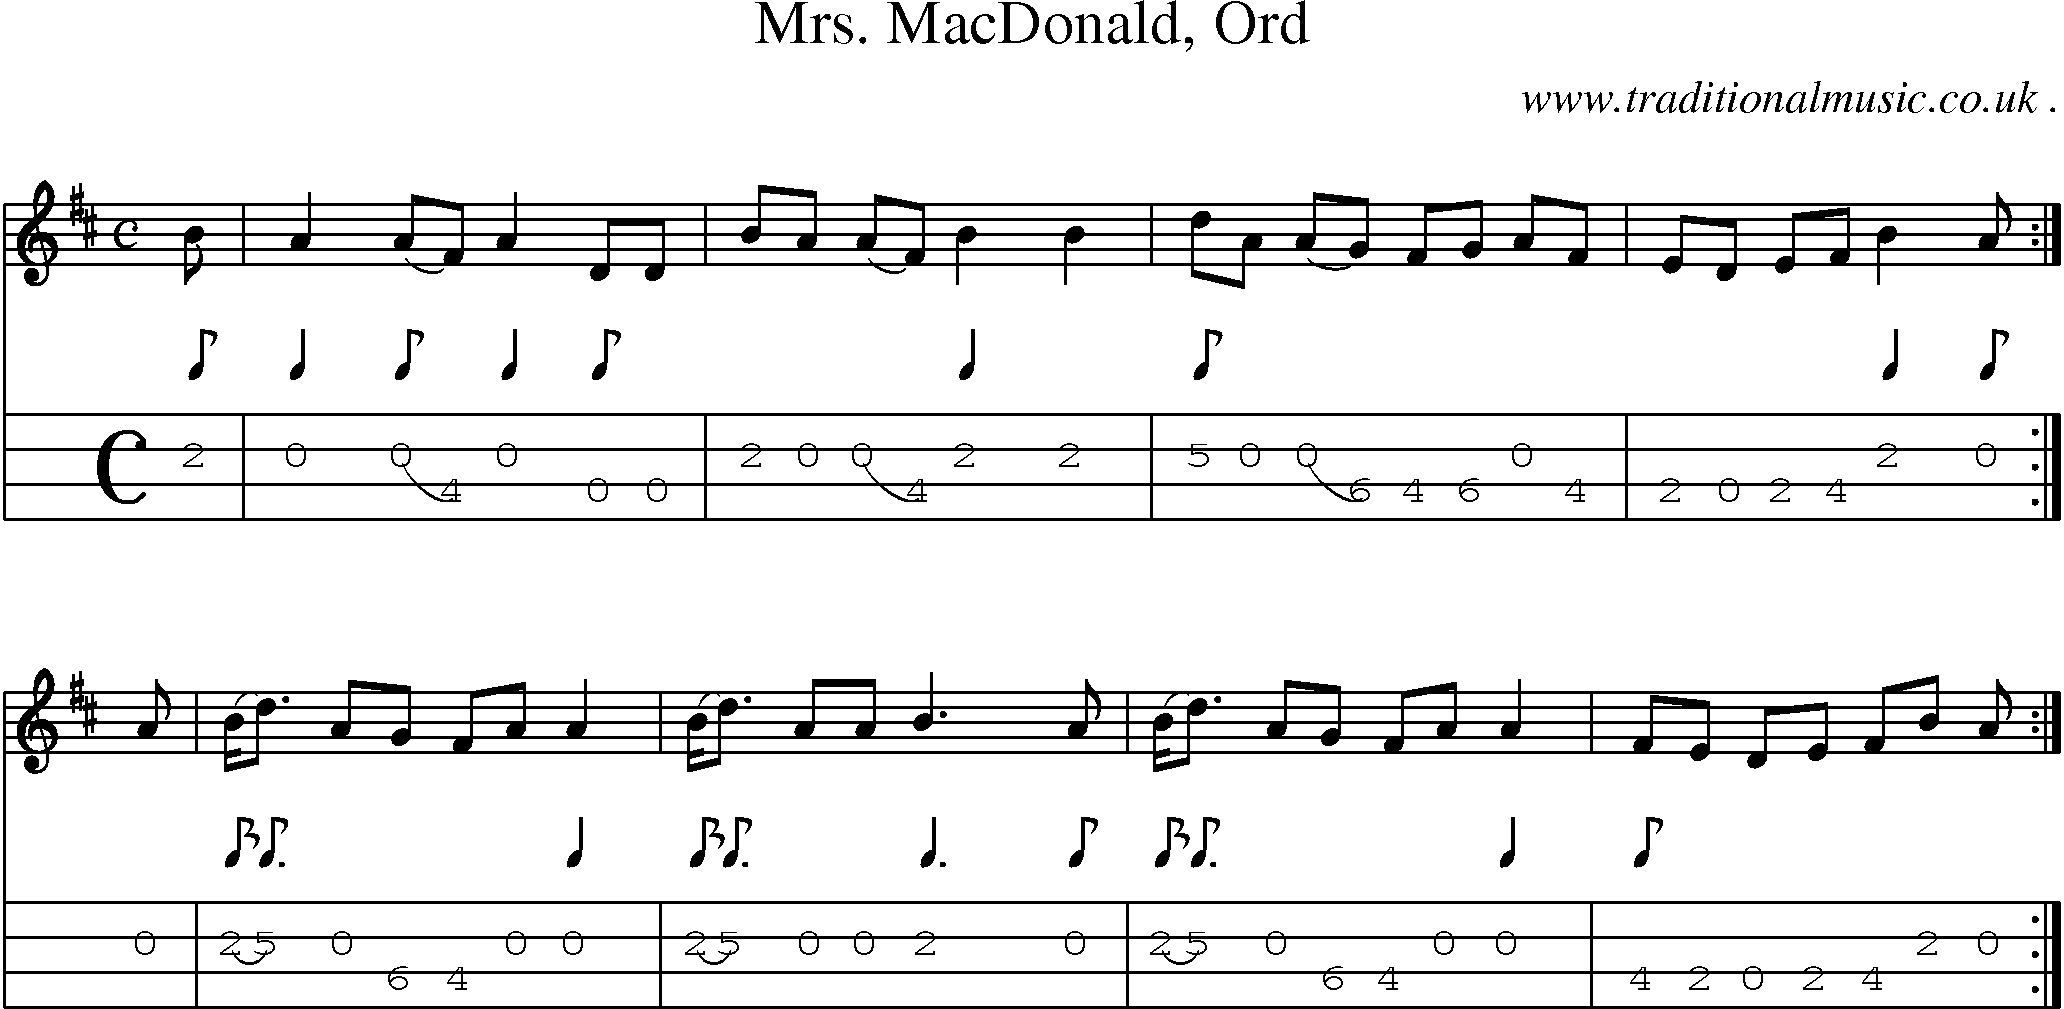 Sheet-music  score, Chords and Mandolin Tabs for Mrs Macdonald Ord